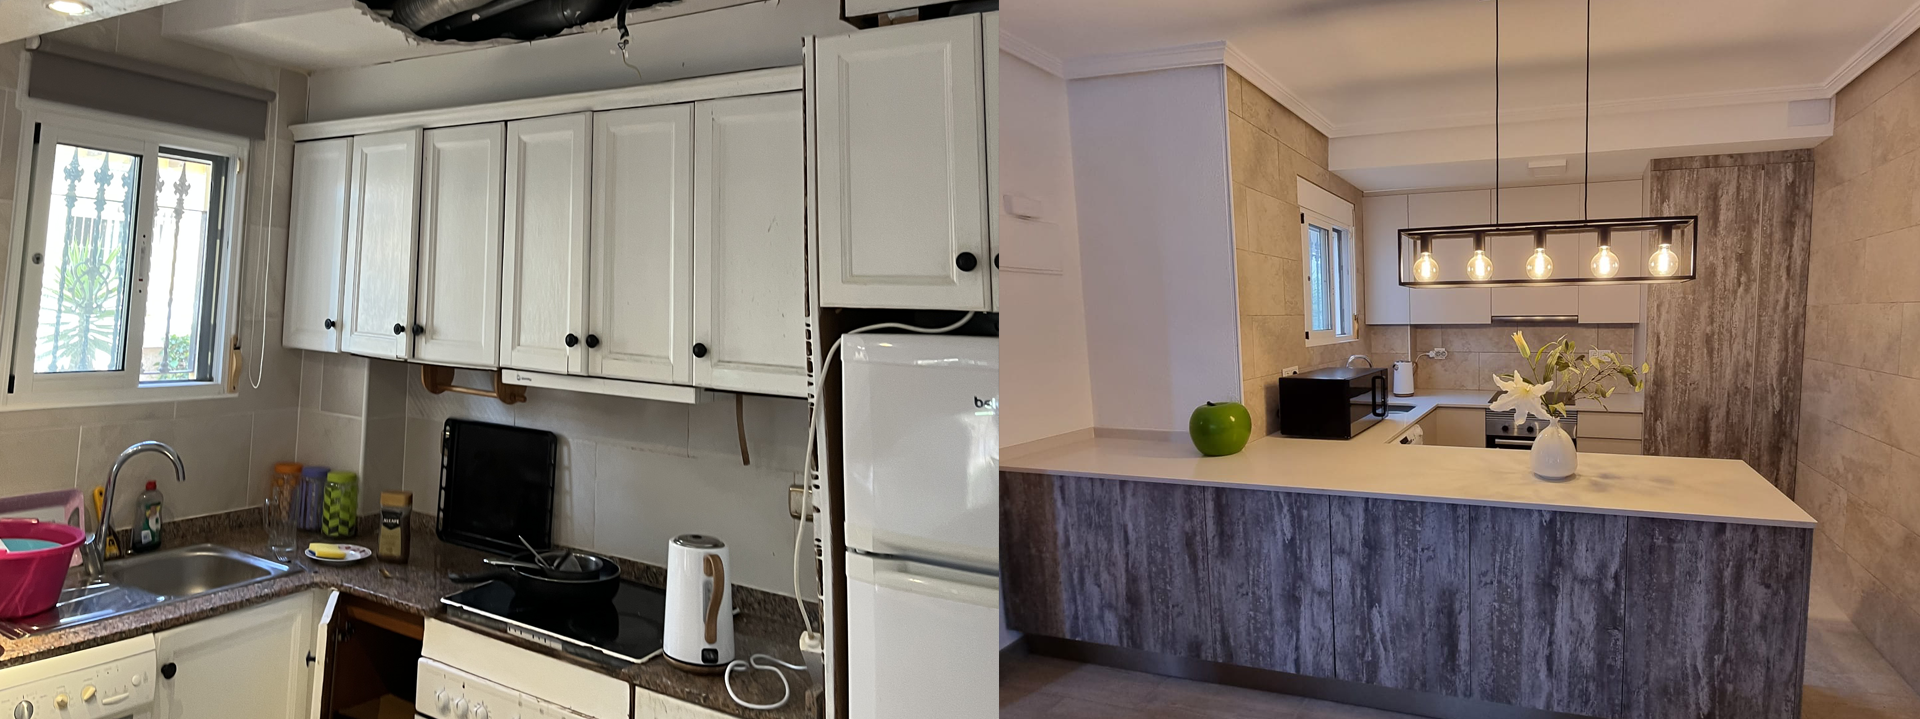 kitchen-renovation-before-and-after